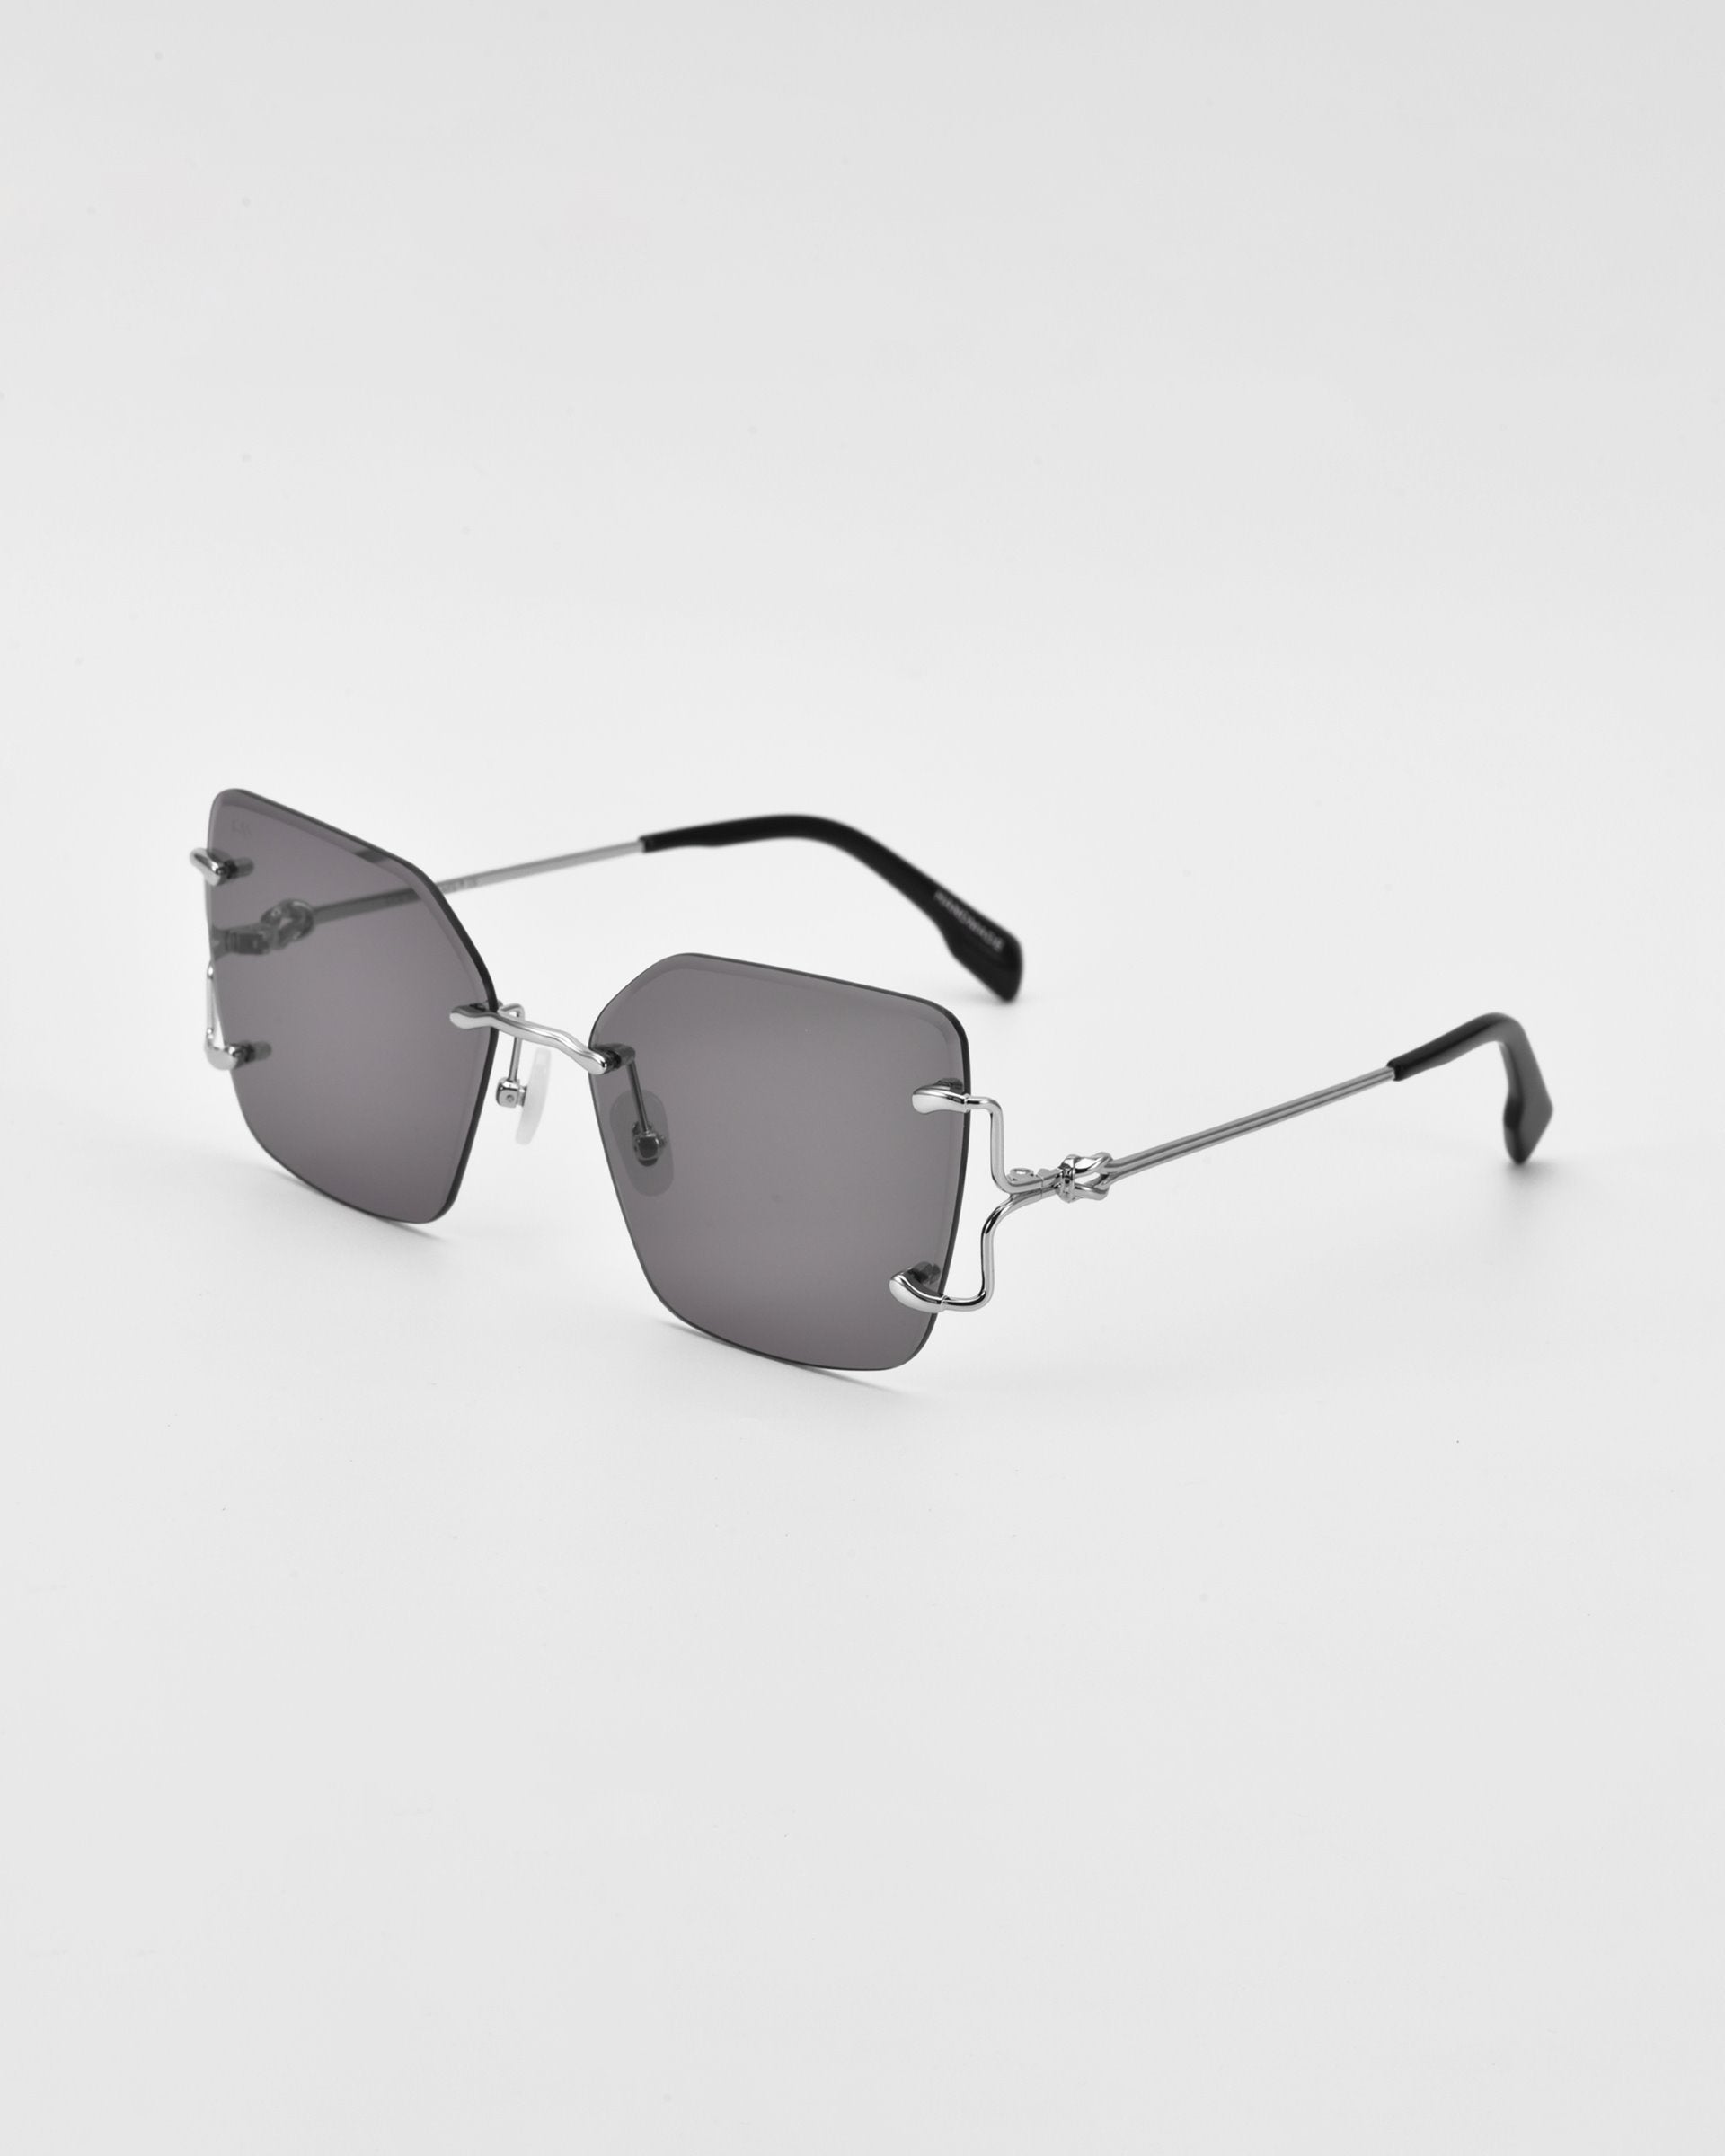 The For Art&#39;s Sake® Starlit sunglasses feature oversized square lenses and thin, metallic silver temples. The rimless design is complemented by jade-stone nosepads, adding a touch of luxury. The minimalist, sleek metallic nose bridge and hinges complete the look against a plain white background.